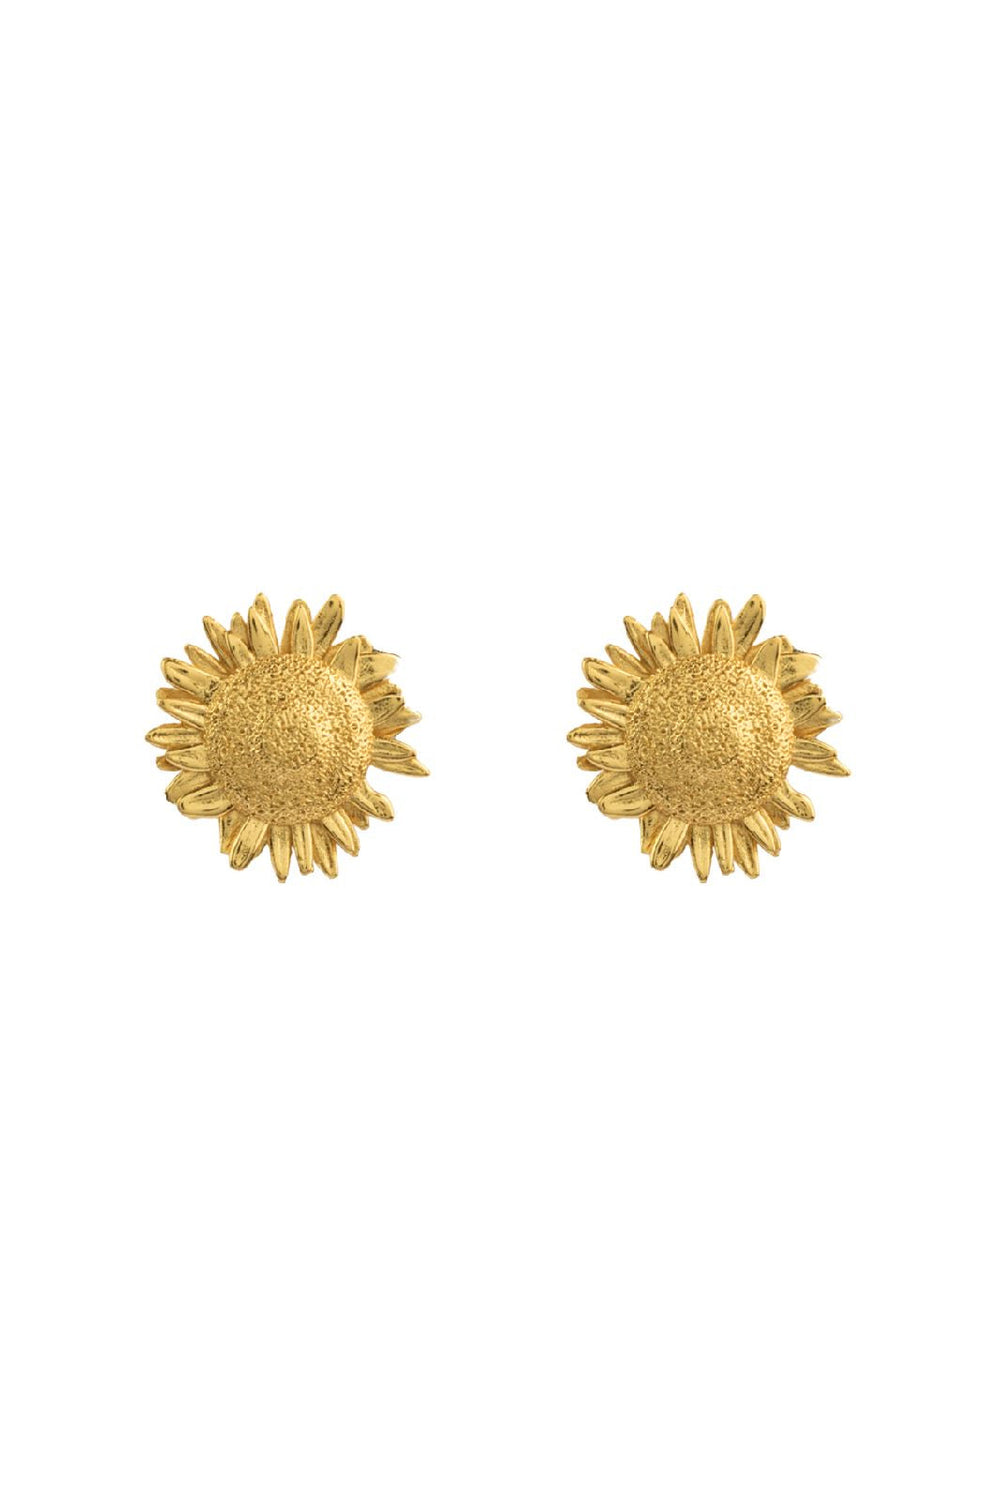 House Of Vincent - Mock Meadow Earrings - Gilded